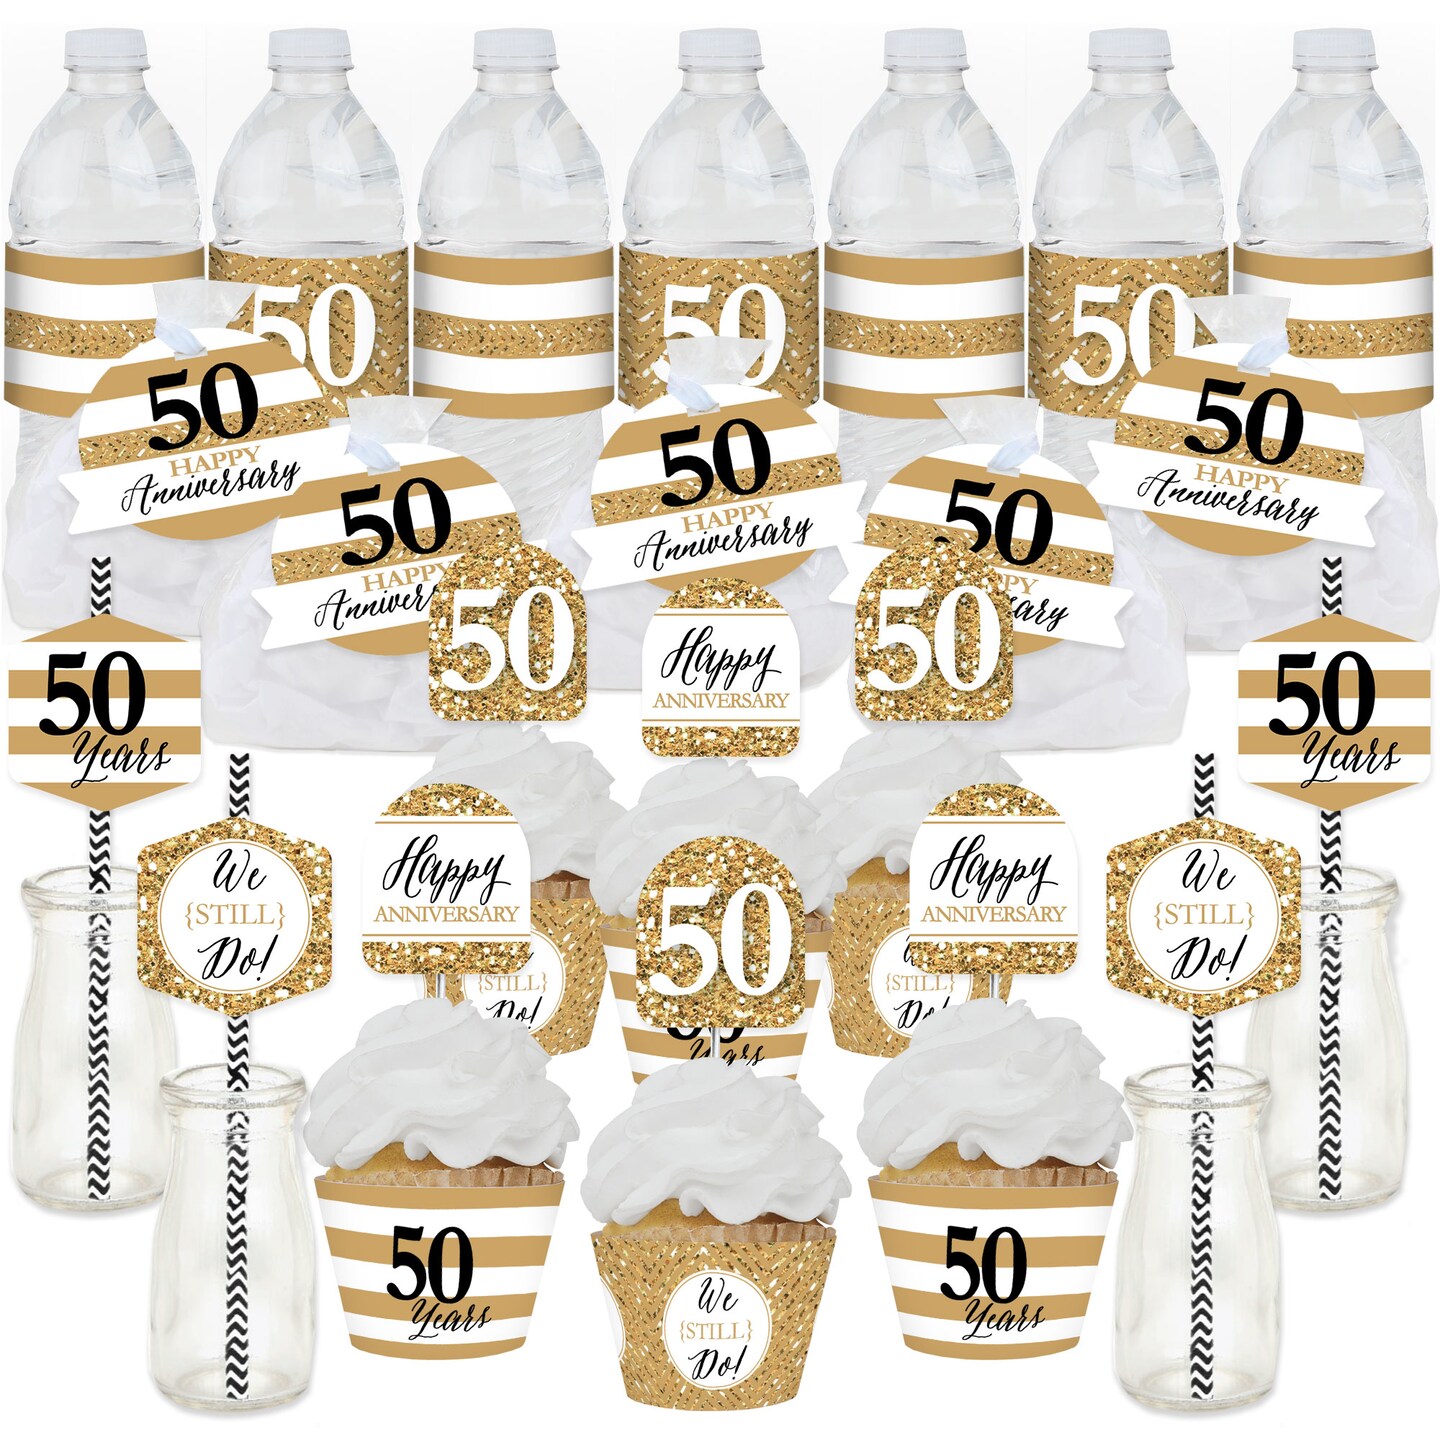 Big Dot of Happiness We Still Do - 50th Wedding Anniversary - Anniversary Party Favors and Cupcake Kit - Fabulous Favor Party Pack - 100 Pieces